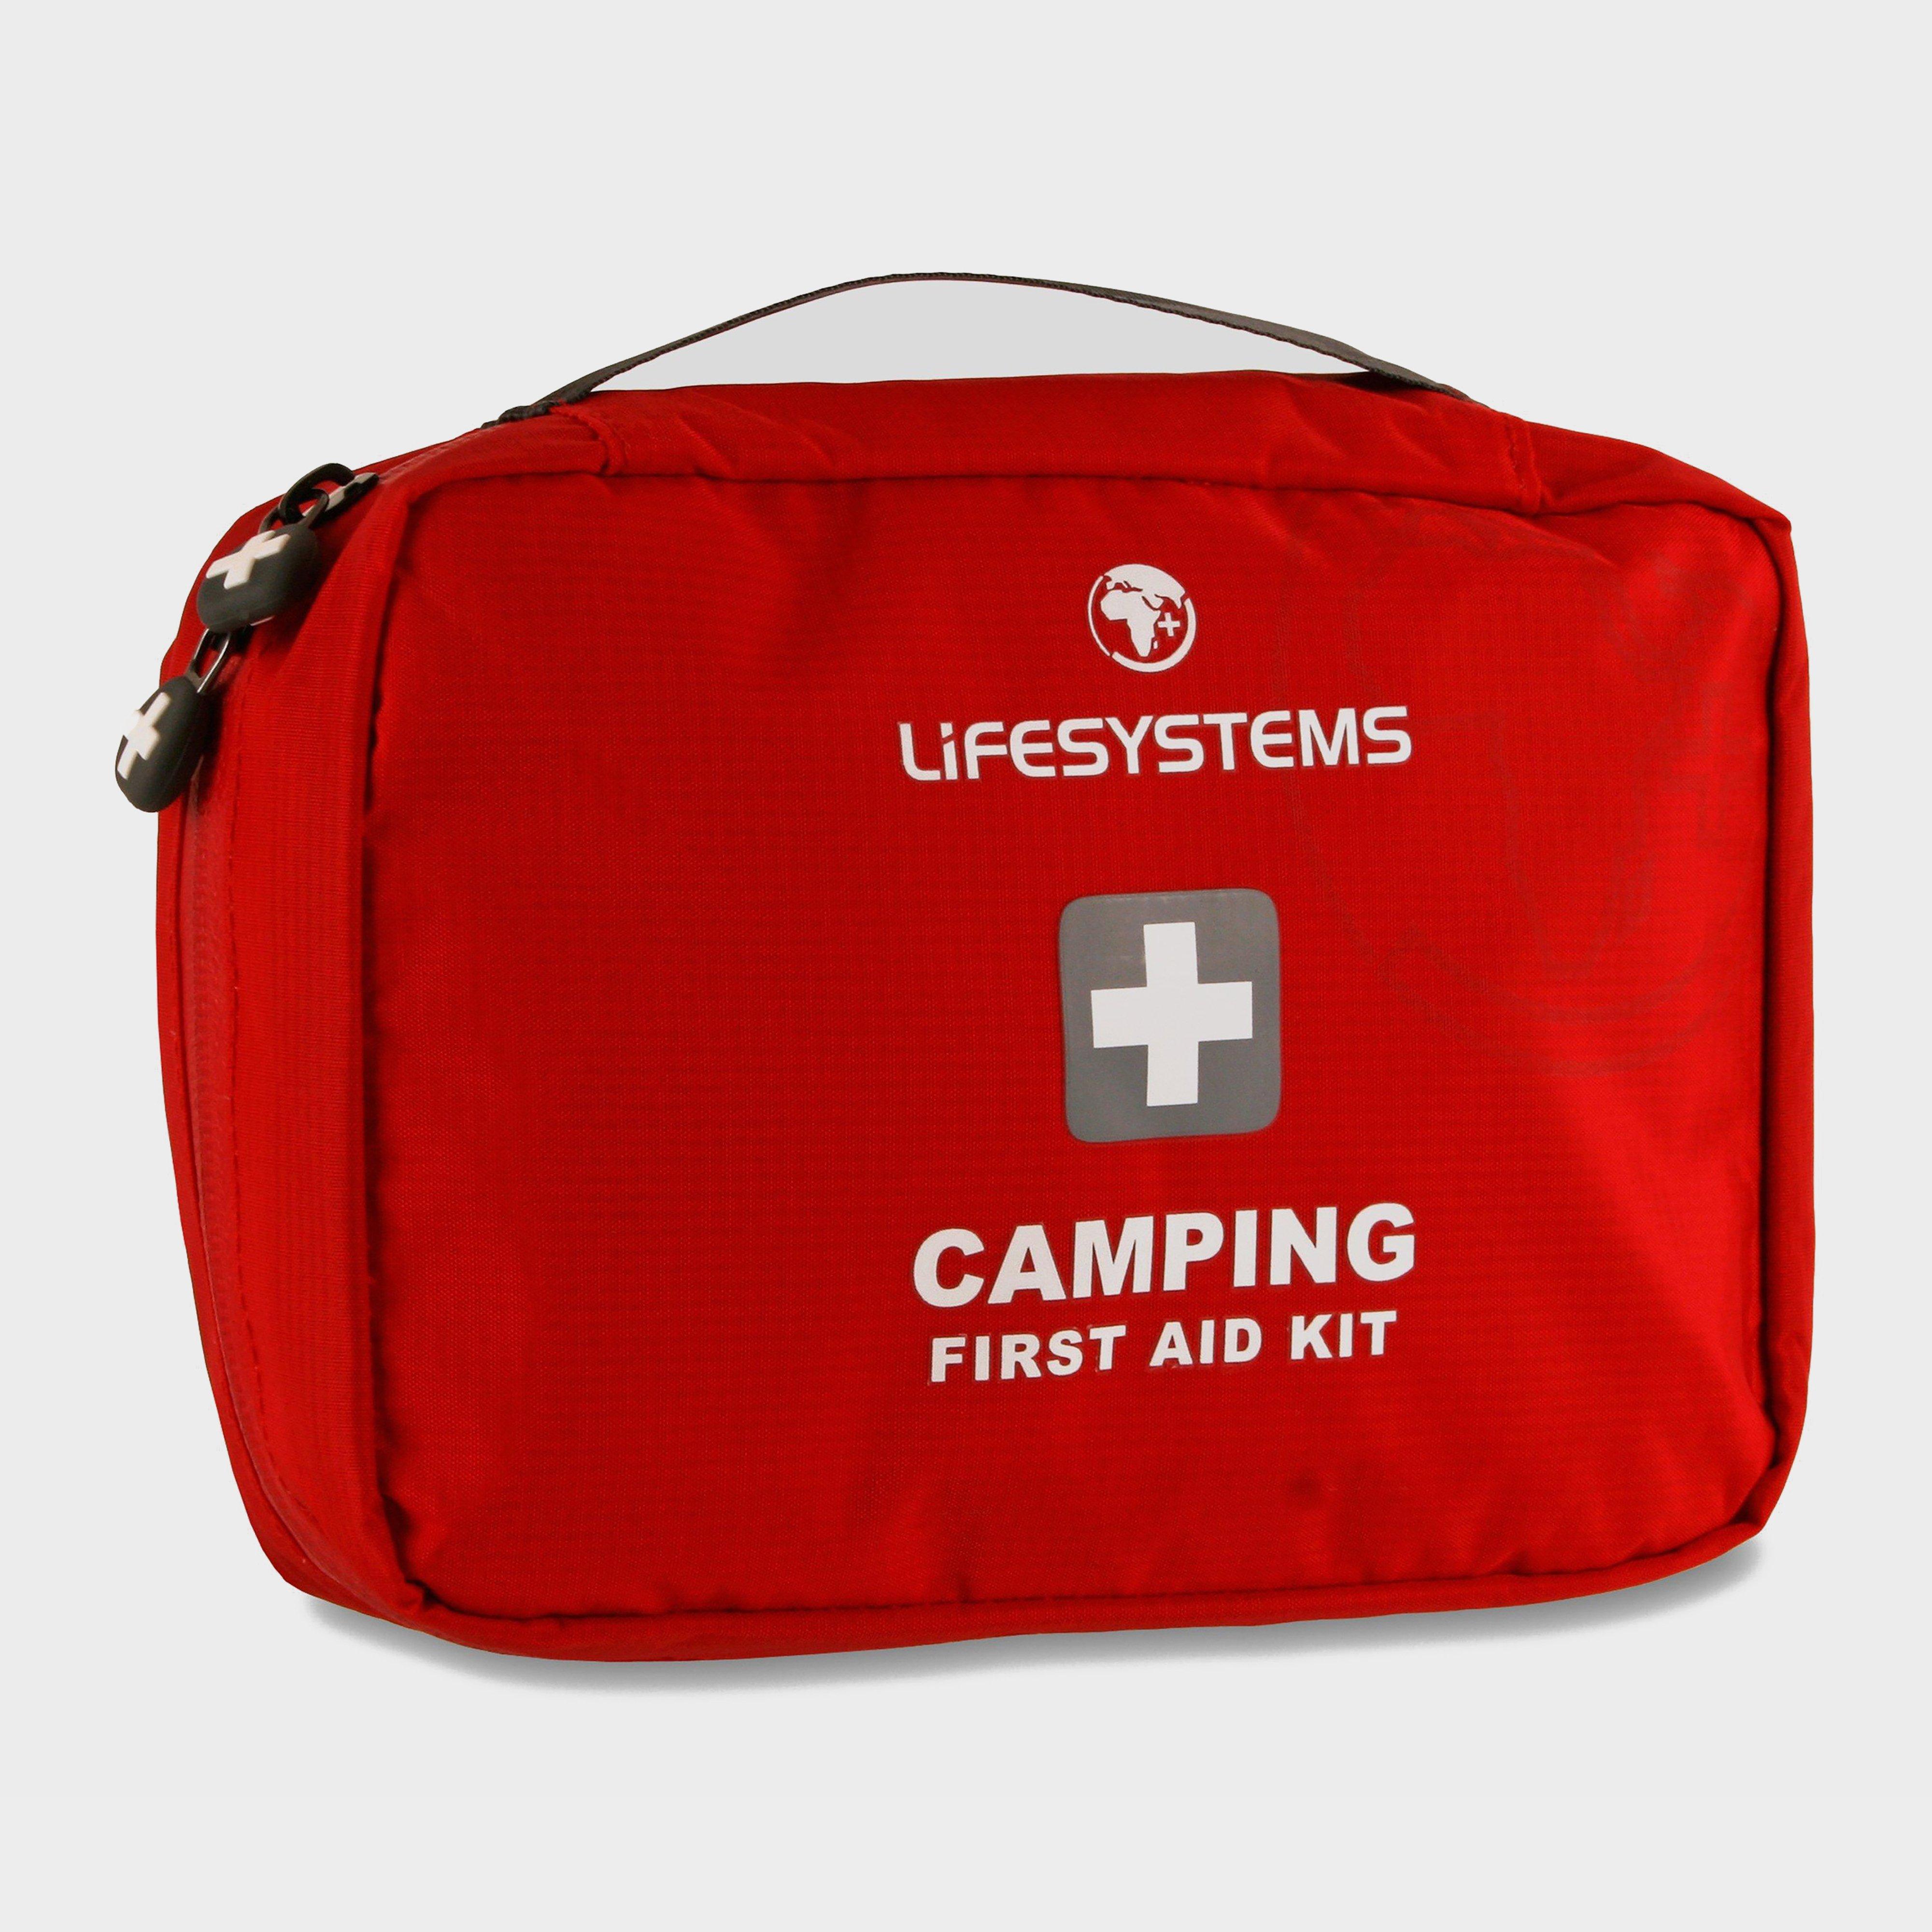 Lifesystems Lifesystems Camping First Aid Kit - Red, Red